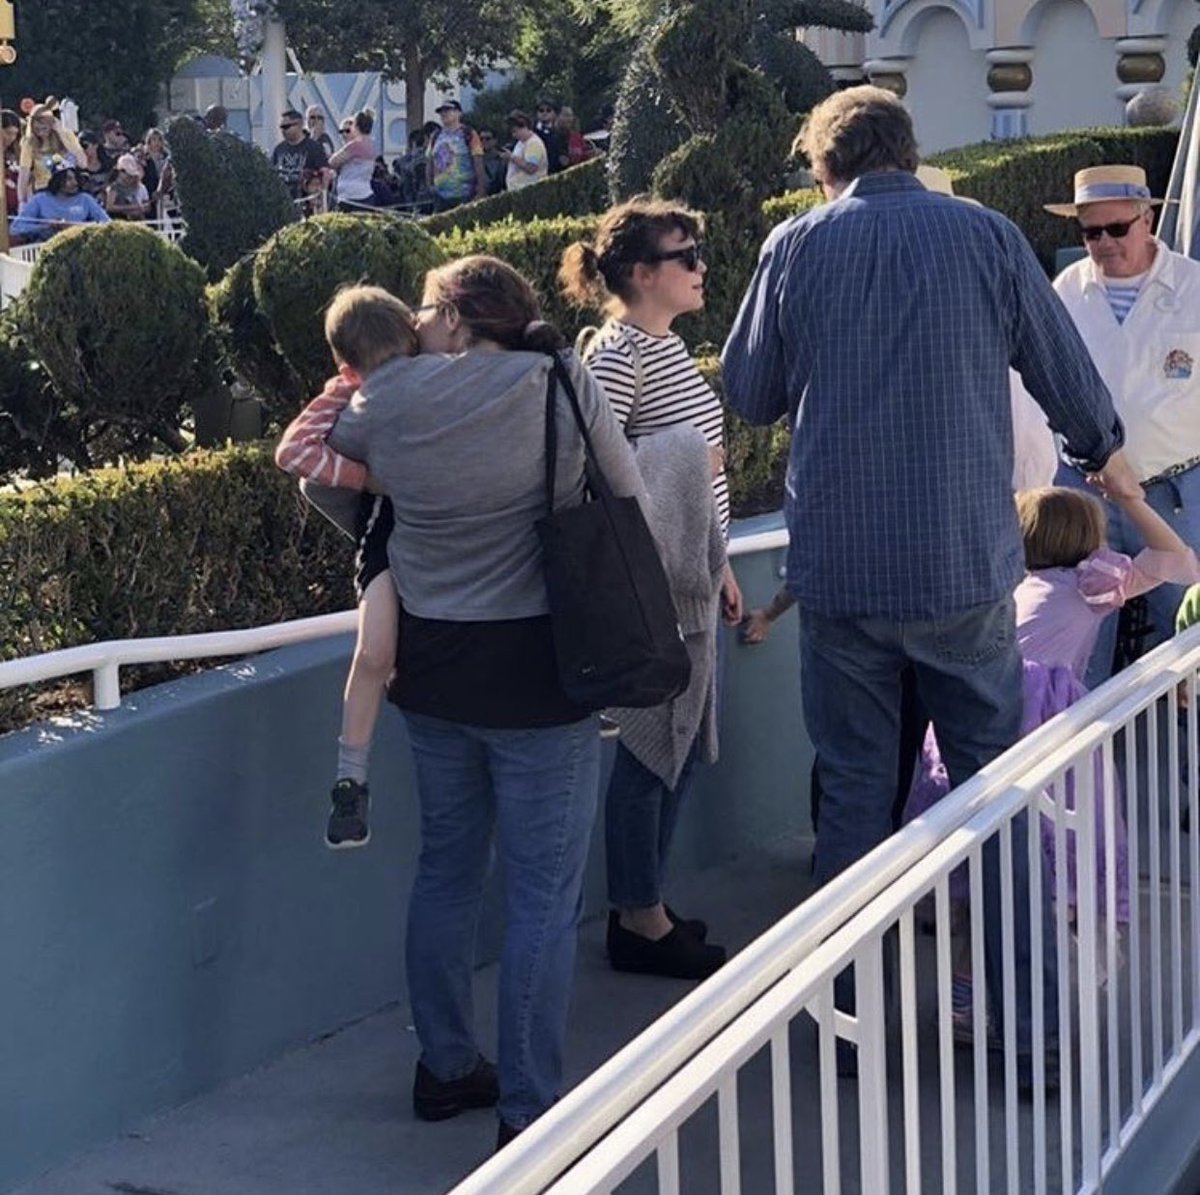 “Ginnifer Goodwin From Zootopia and Once Upon A Time, was seen in the parks today! Thanks @universearoundme for the photo! #Disney #Disneyland #DisneylandParks #CelebSighting #CelebSpotting #CelebritySpotting #CelebritySighting #ginnifergoodwin”

📷: disneyland_celebs